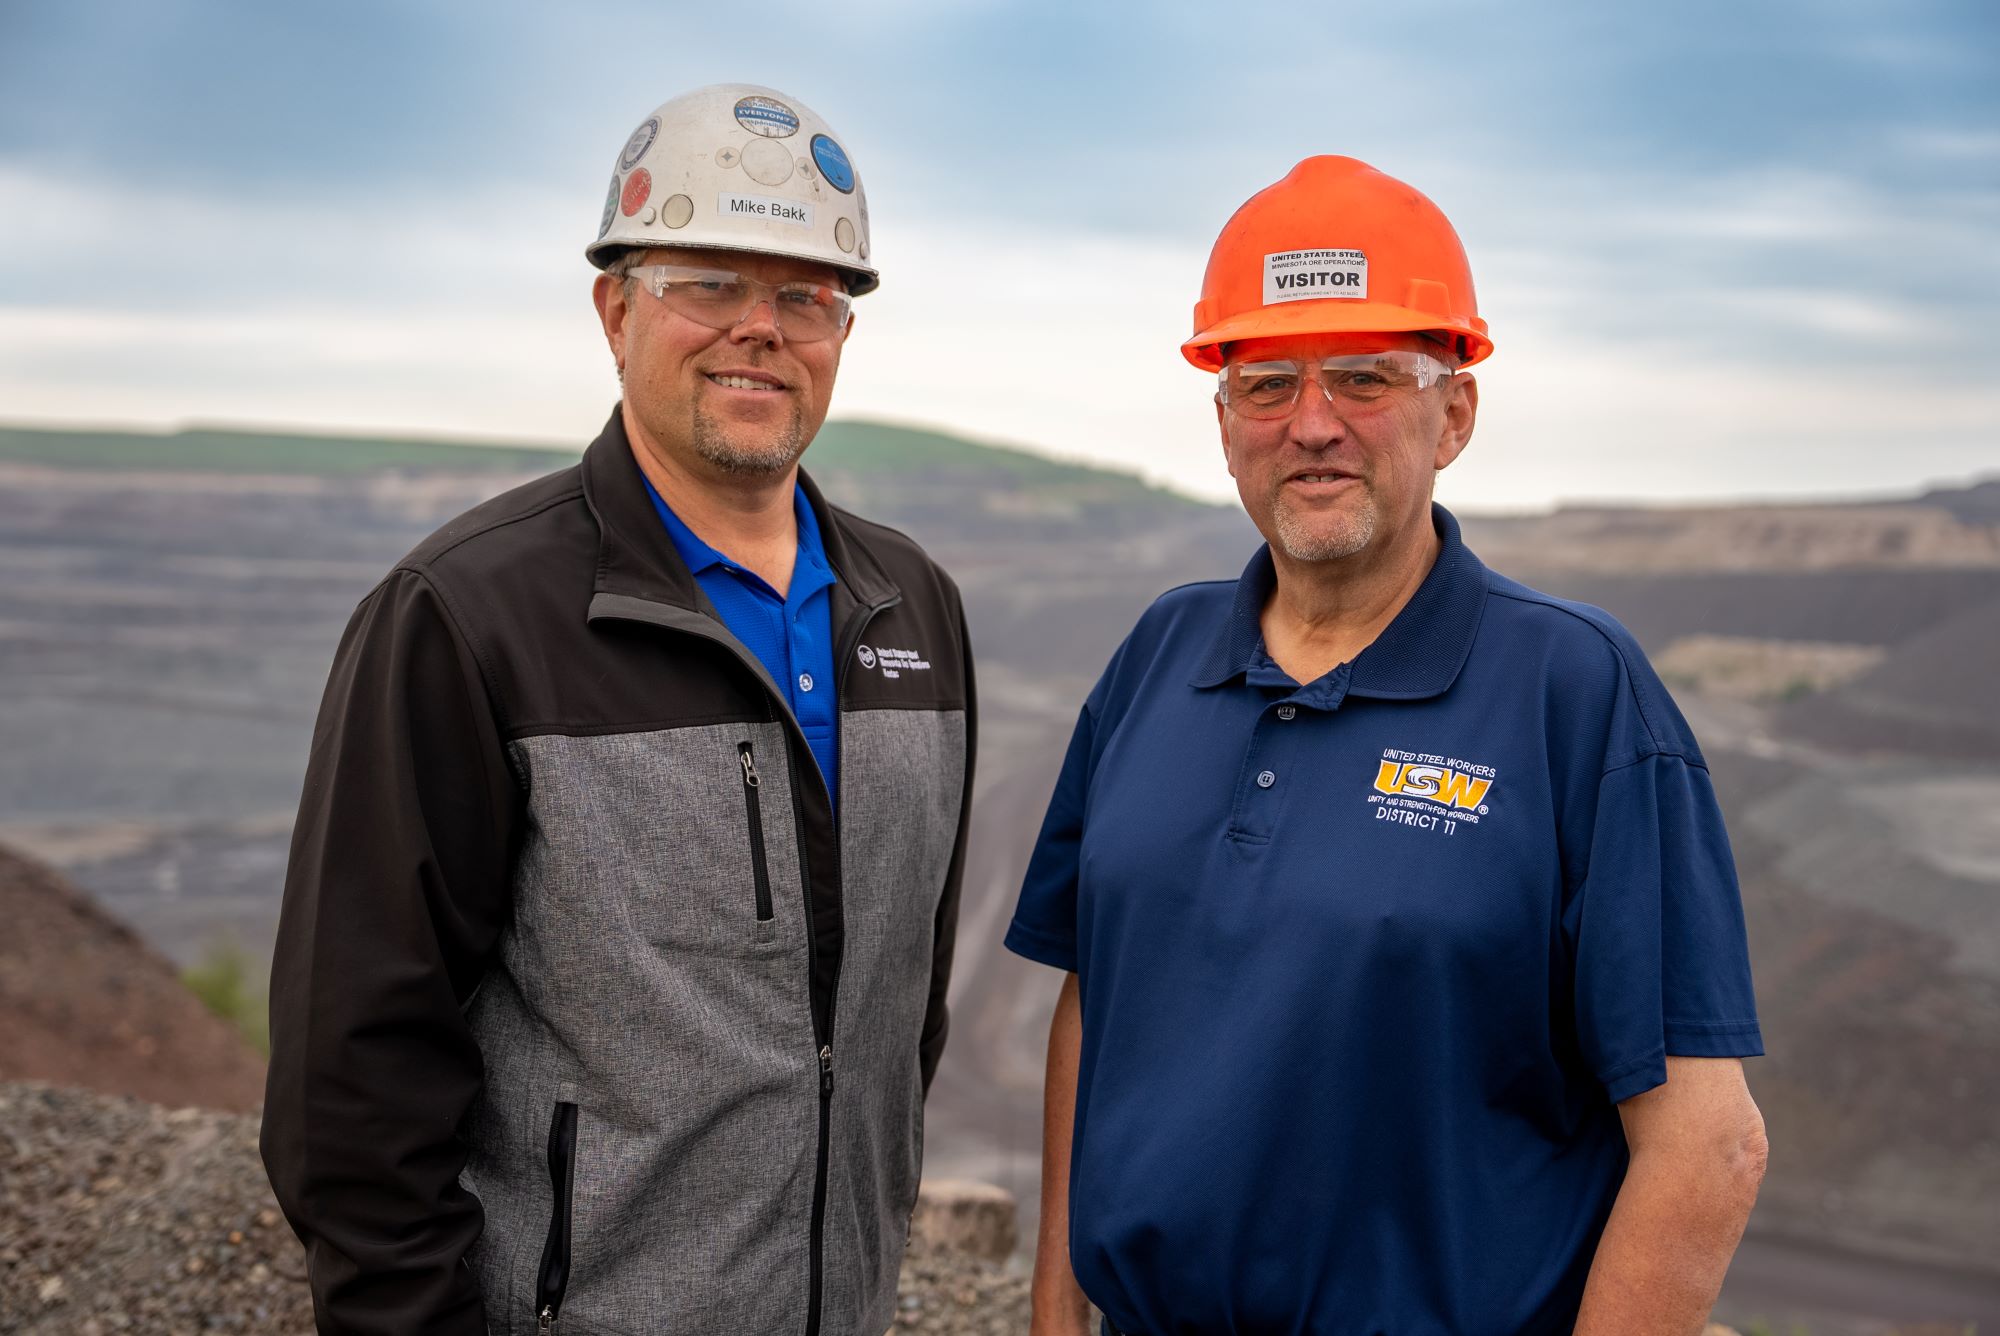 Iron Ore Alliance co-chairs Mike Bakk and John Arbogast post in hardhats in front of an iron mining pit